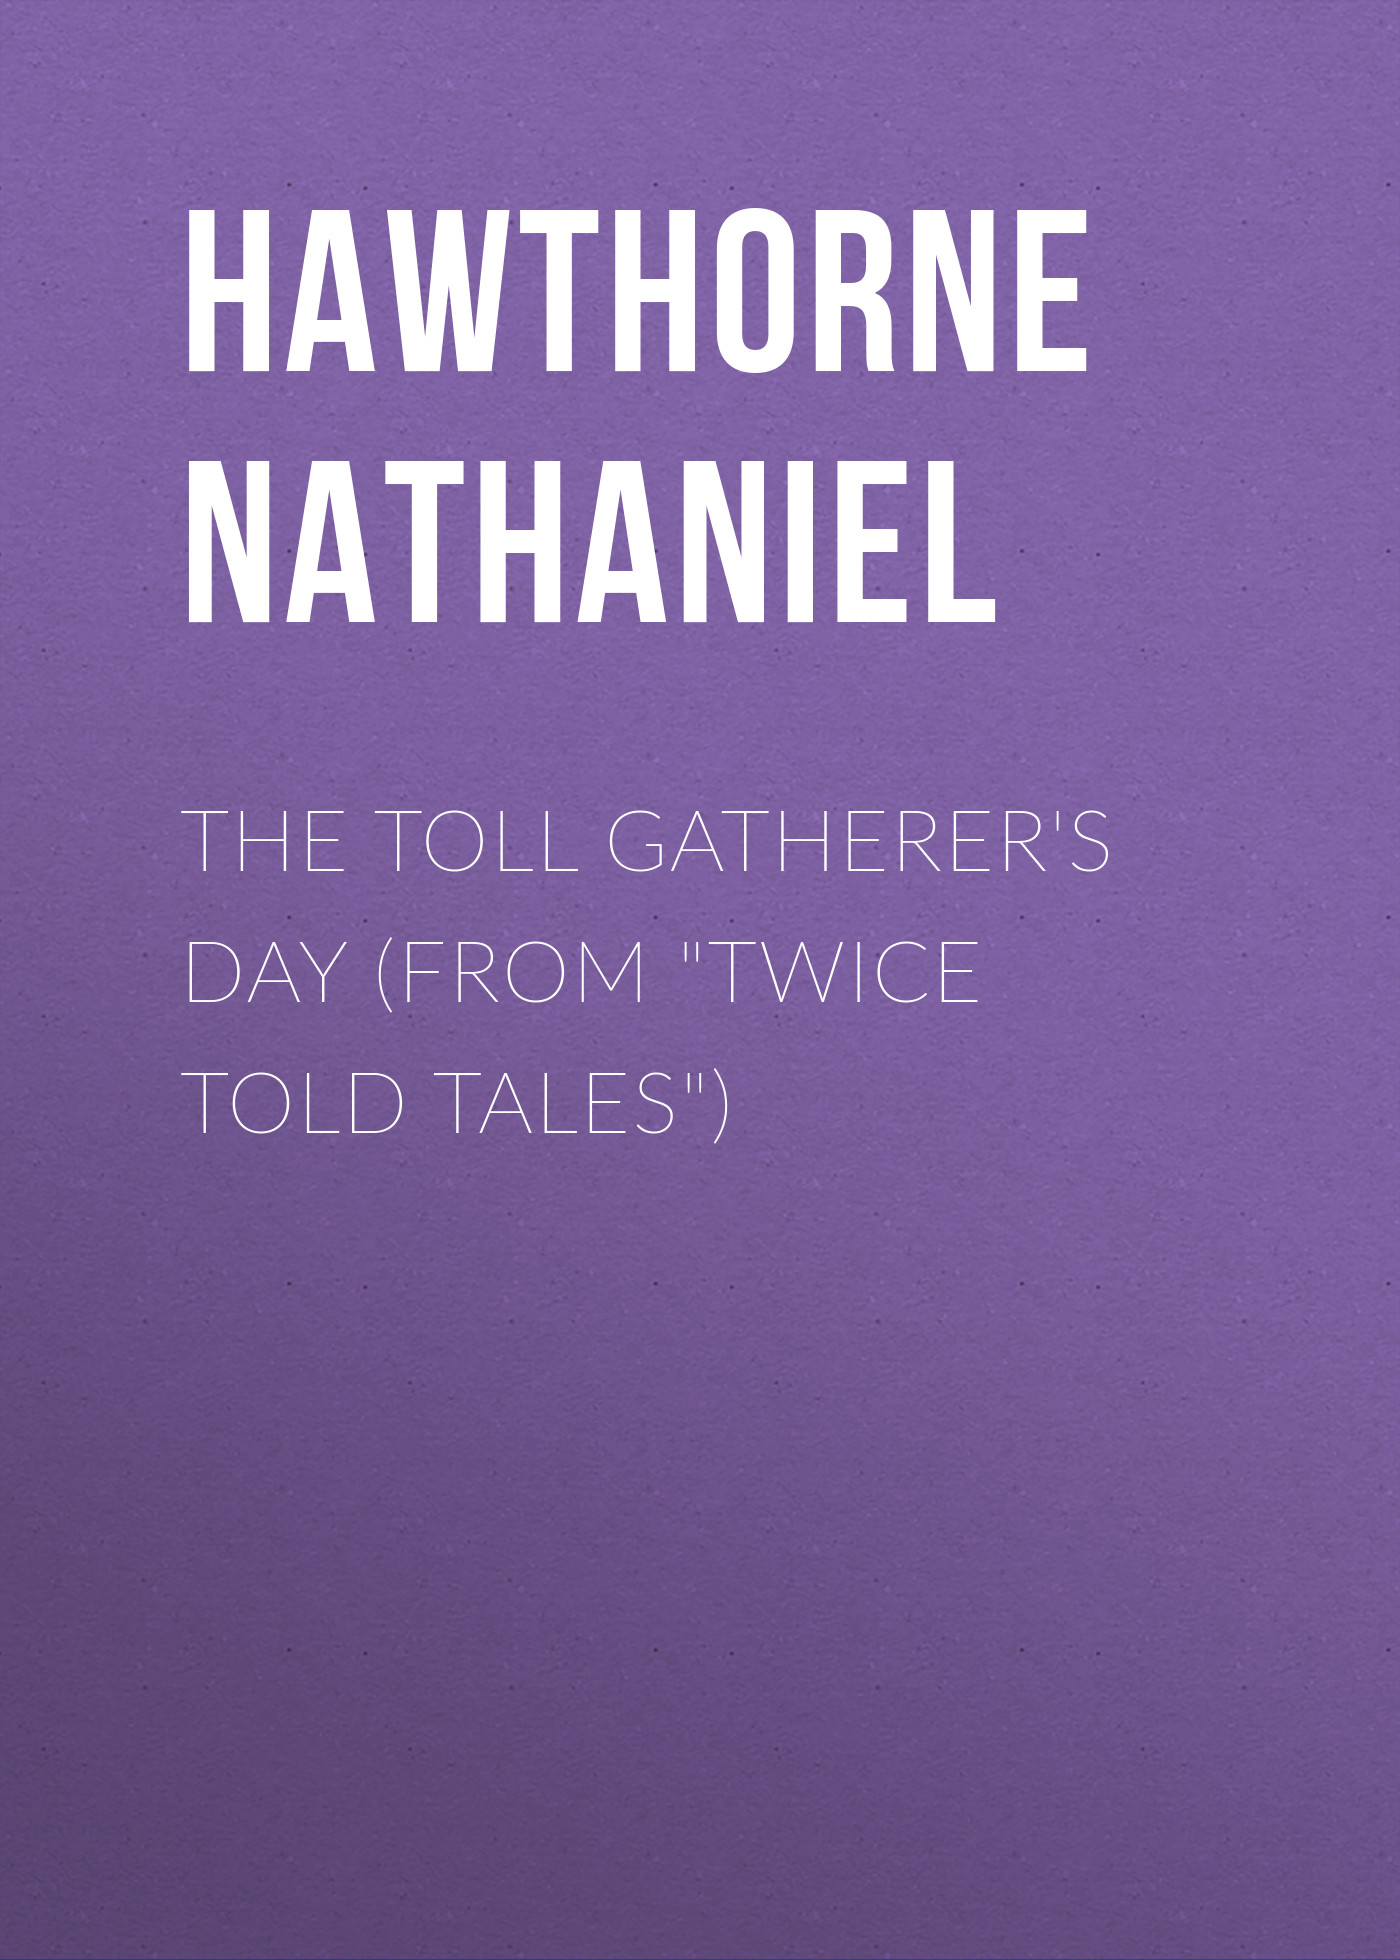 The Toll Gatherer's Day (From "Twice Told Tales")